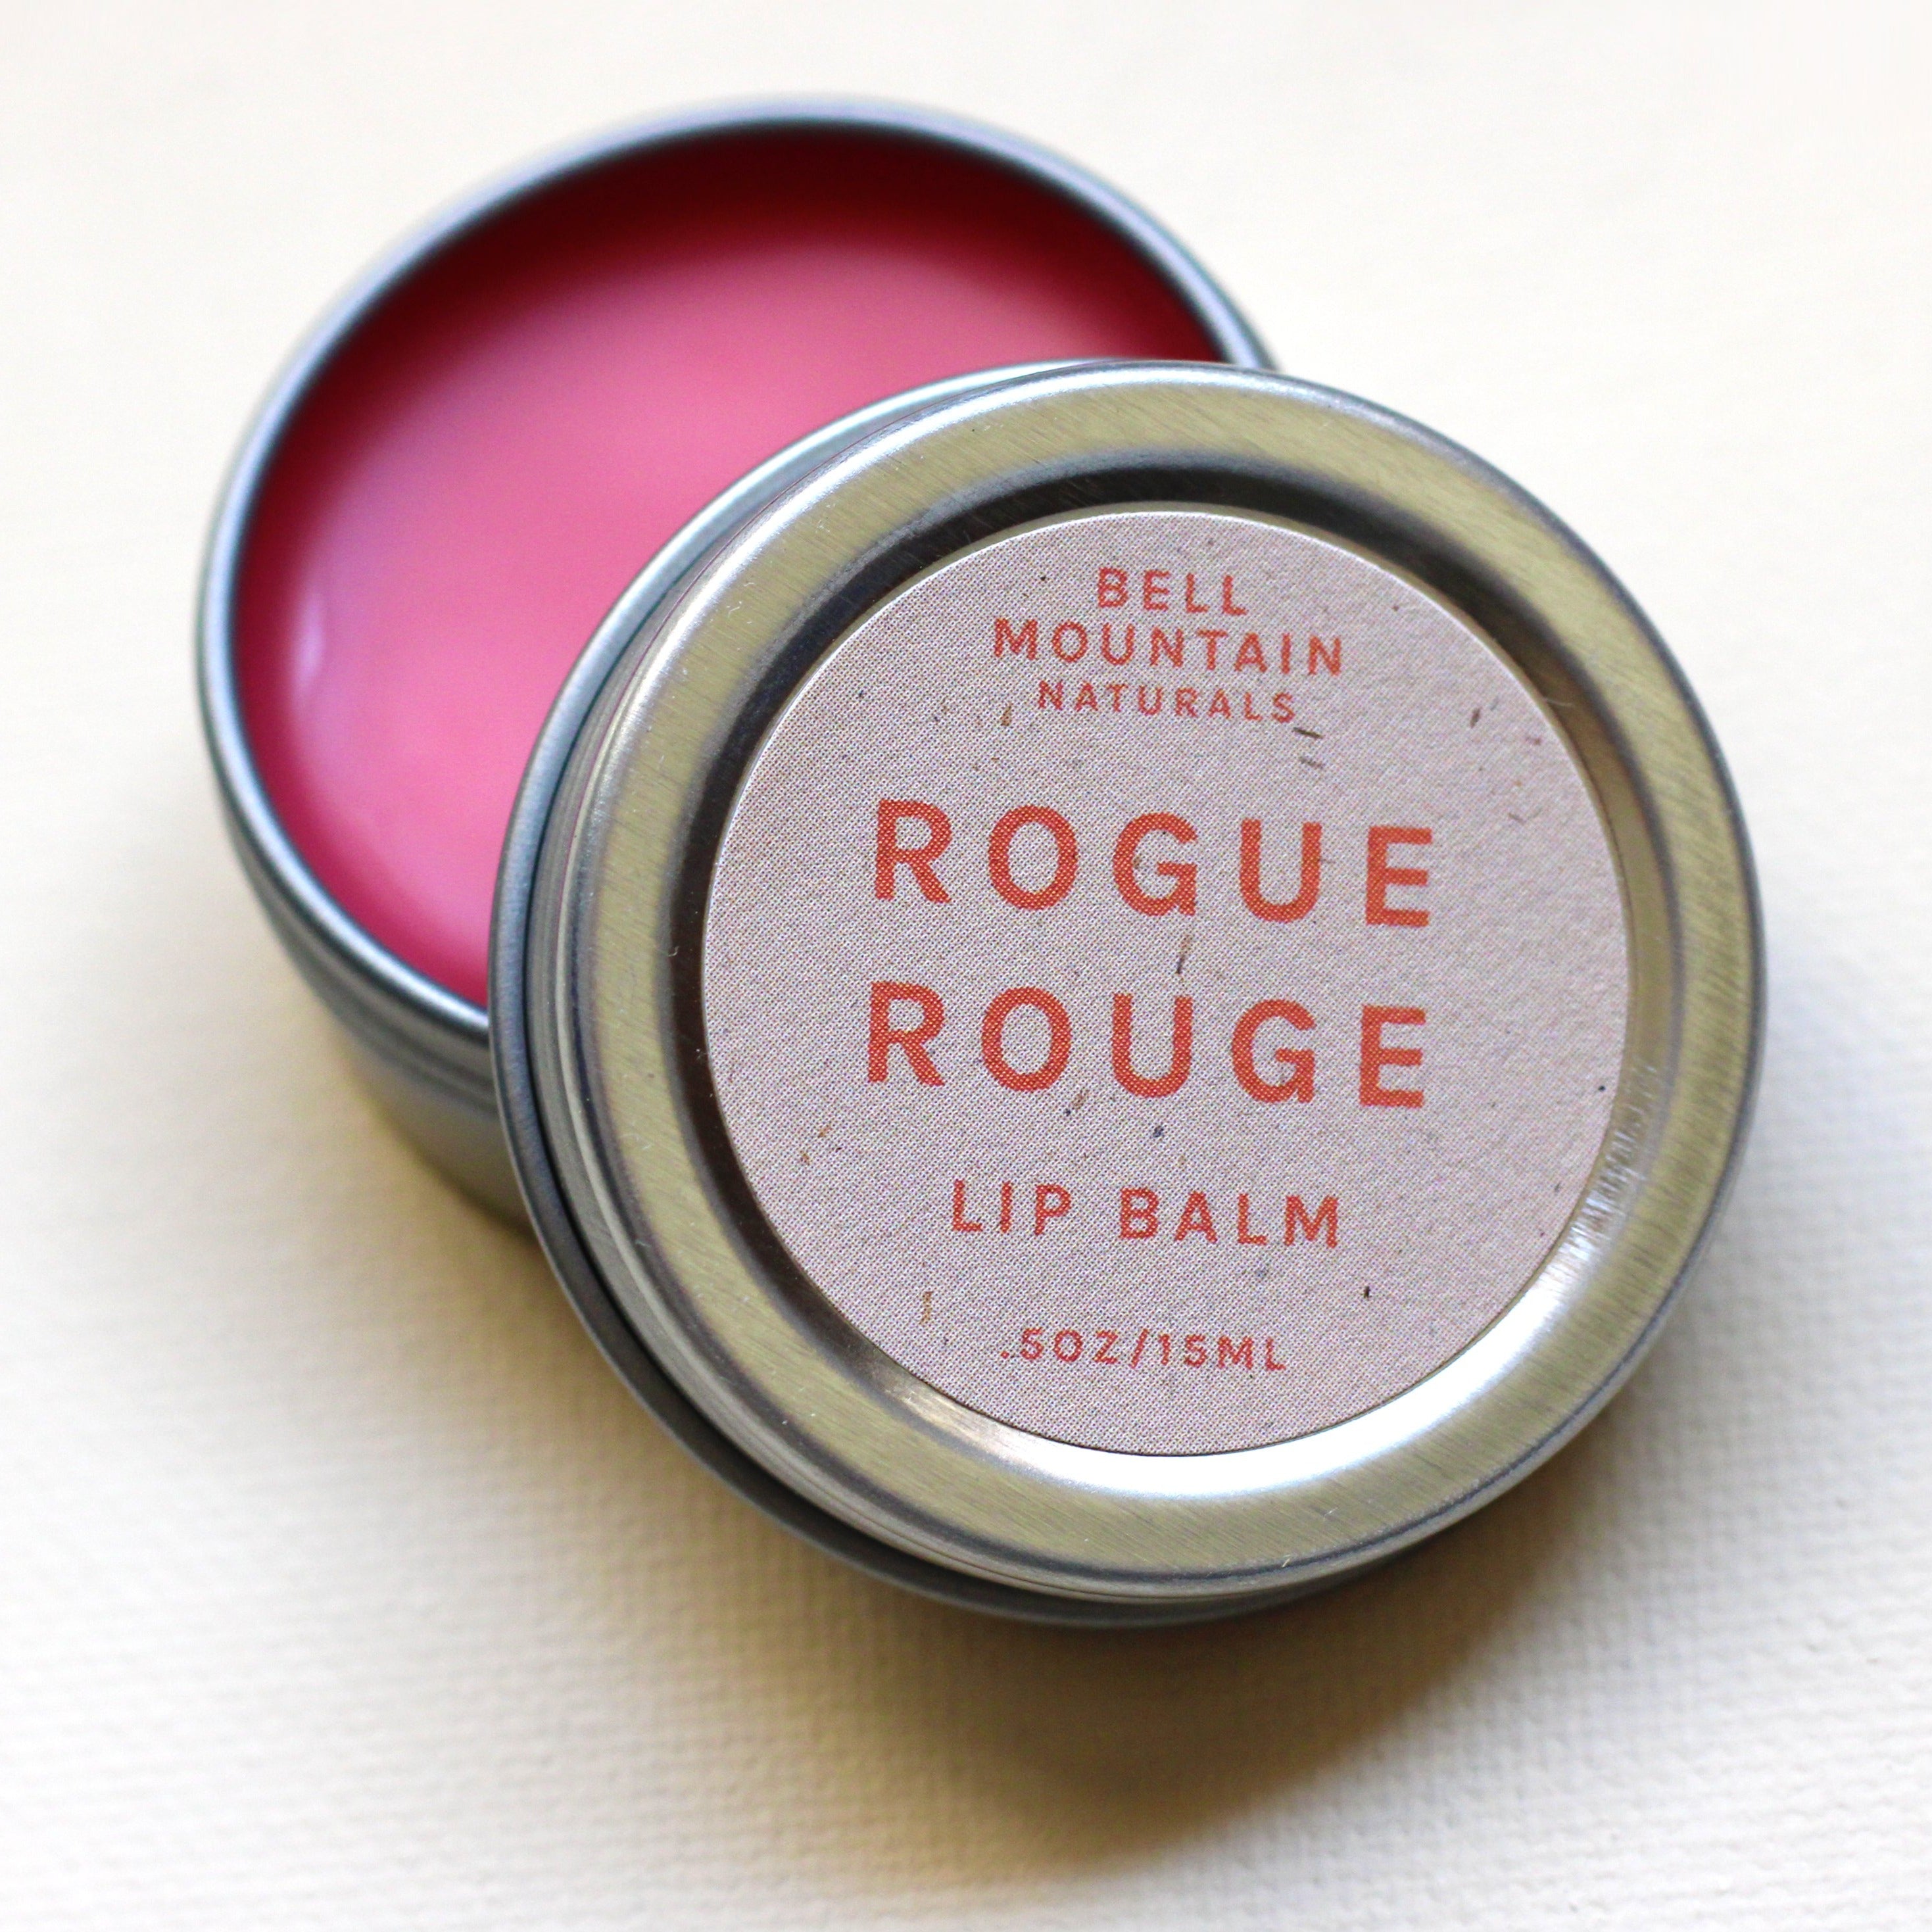 Bell Mountain Naturals Rogue Rouge Lip Balm | Well-Taylored Co.